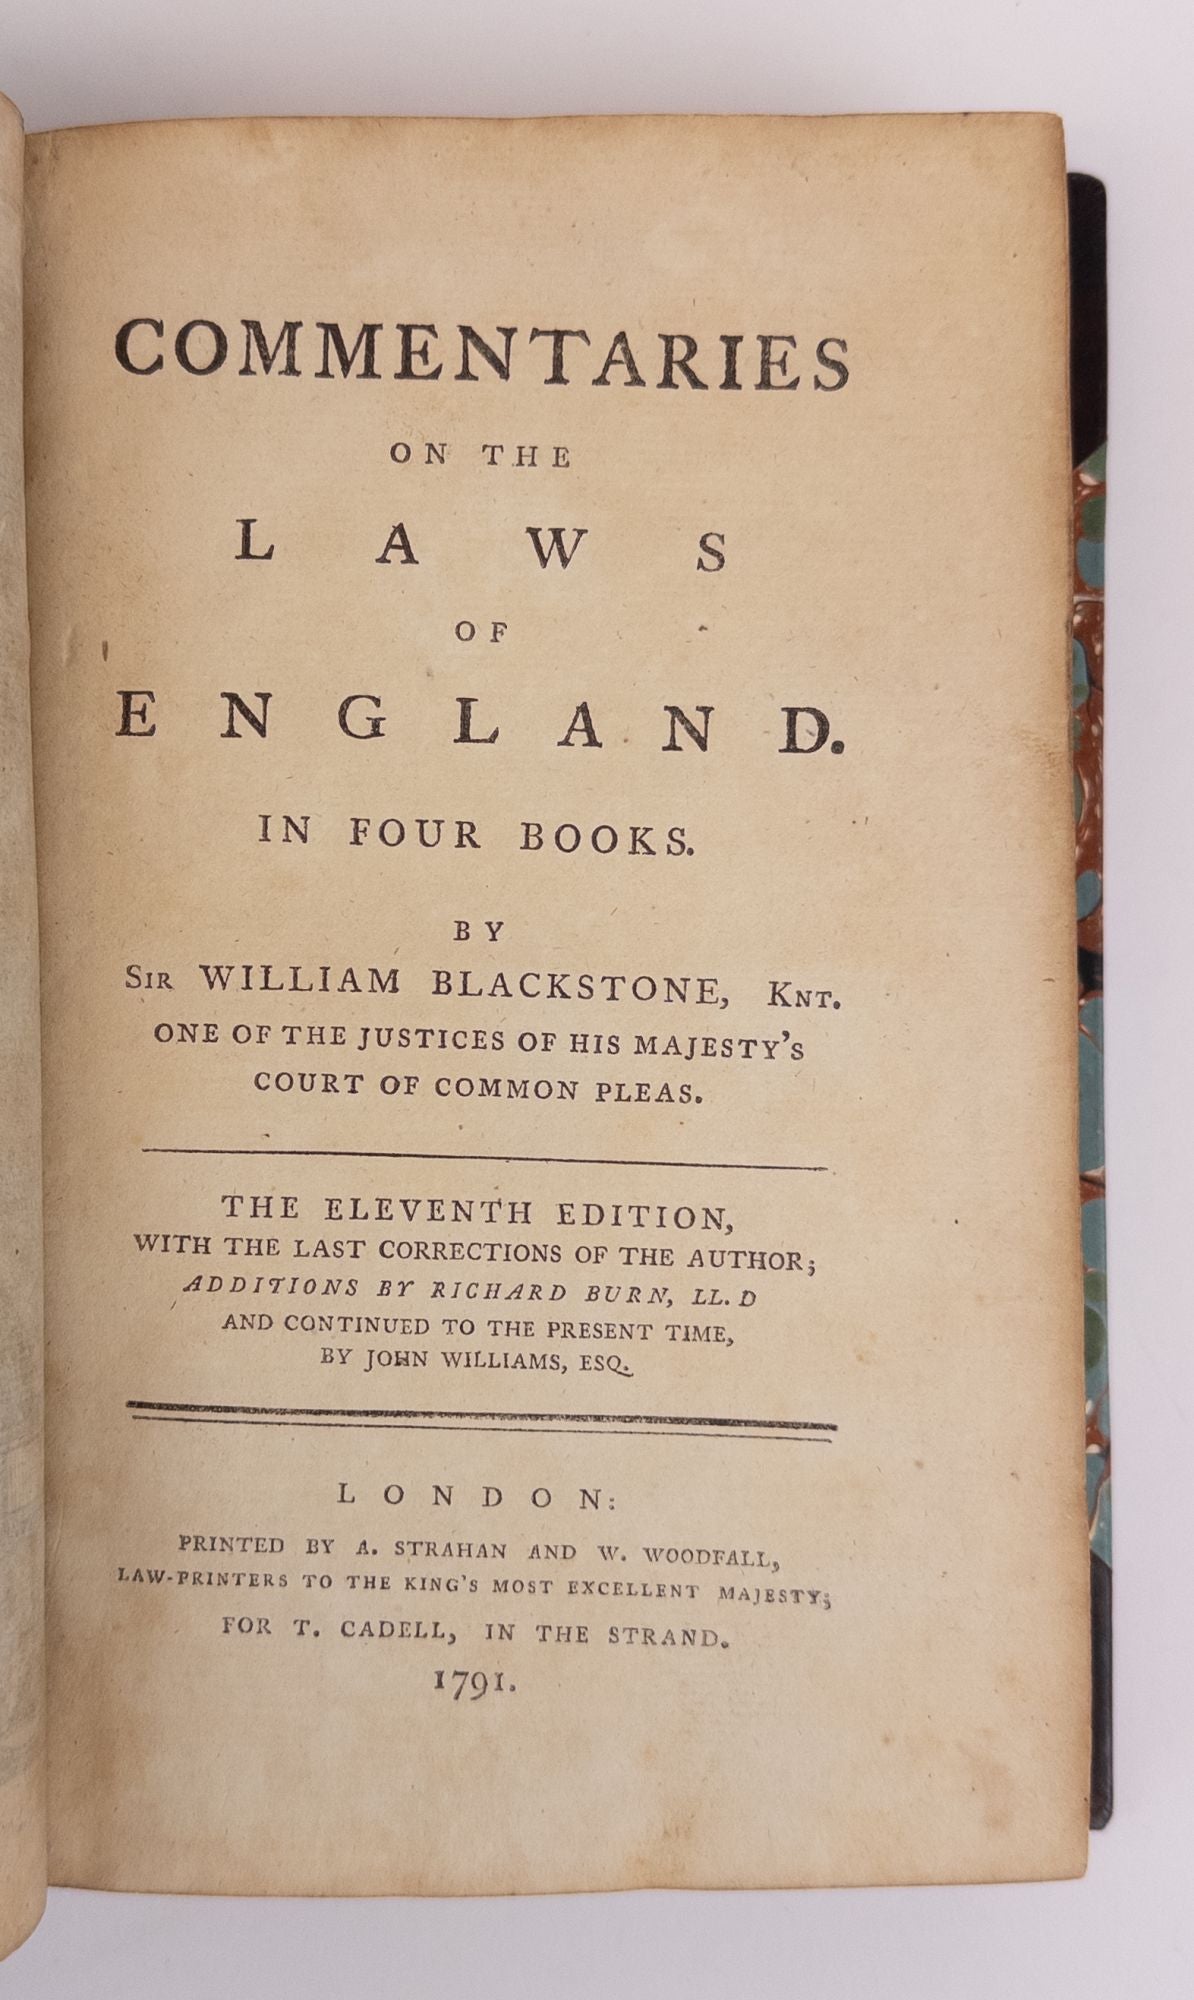 Product Image for COMMENTARIES ON THE LAWS OF ENGLAND. IN FOUR BOOKS [Four Volumes]